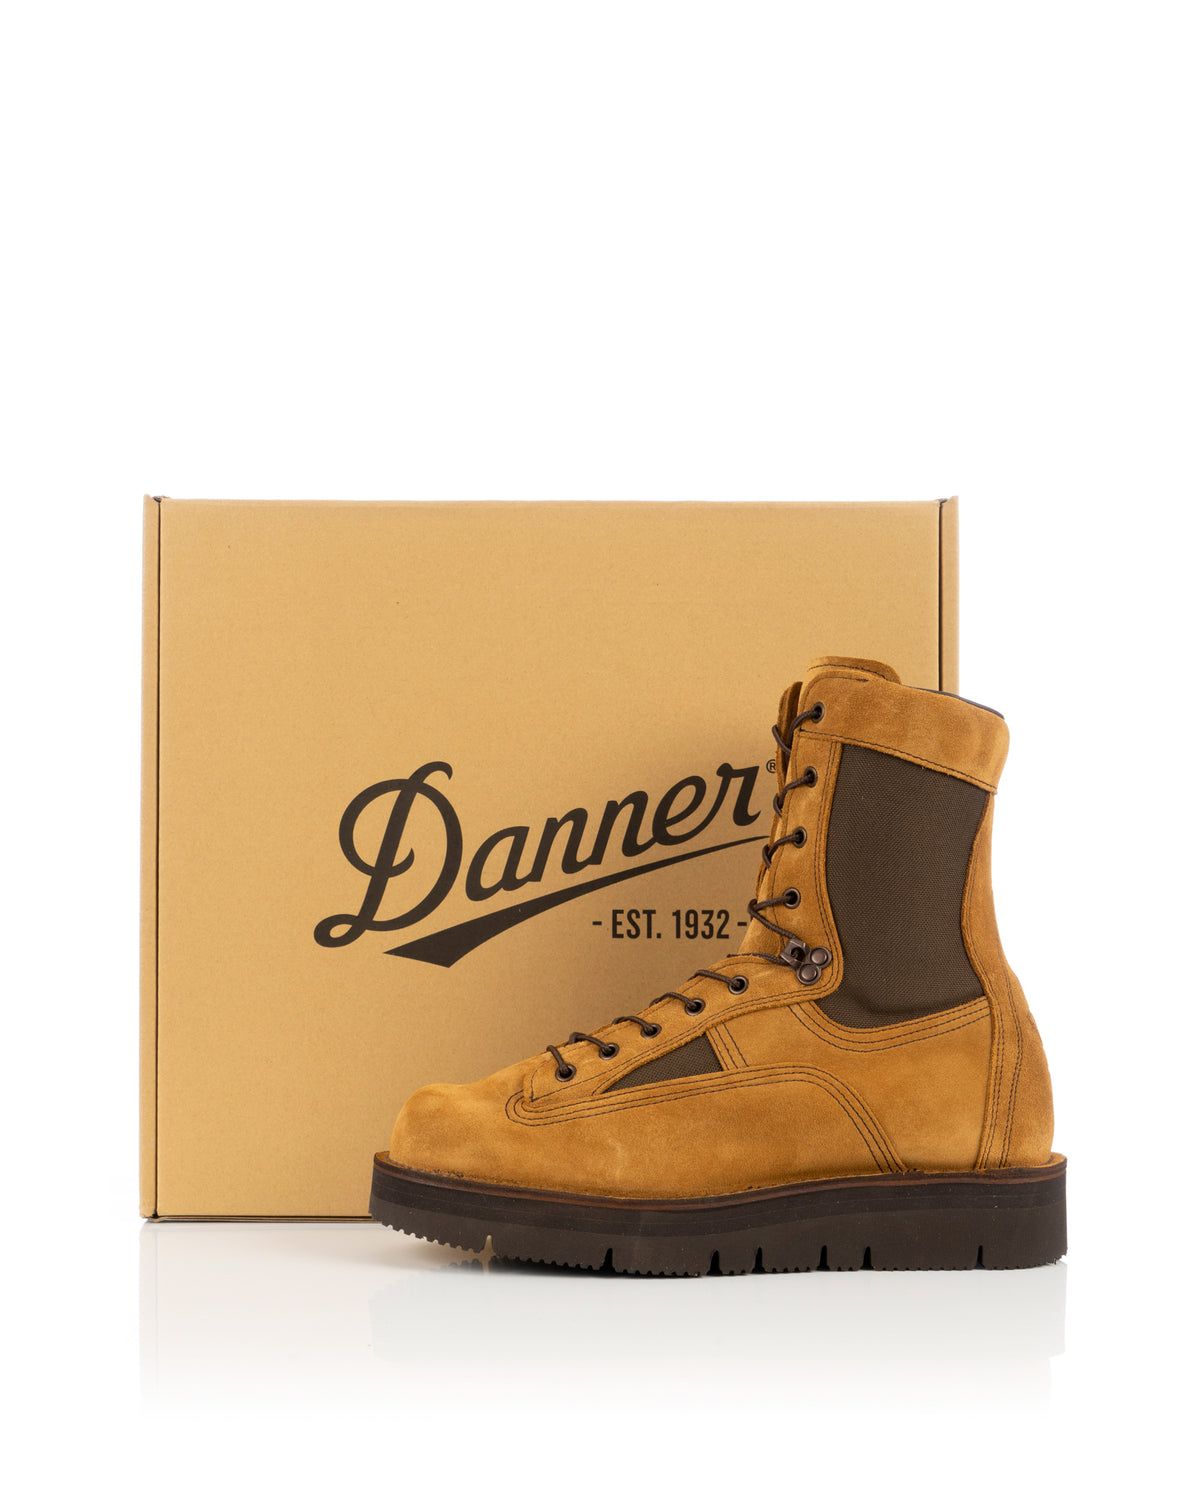 White Mountaineering | x DANNER BOOTS 'Combat' Brown - Concrete